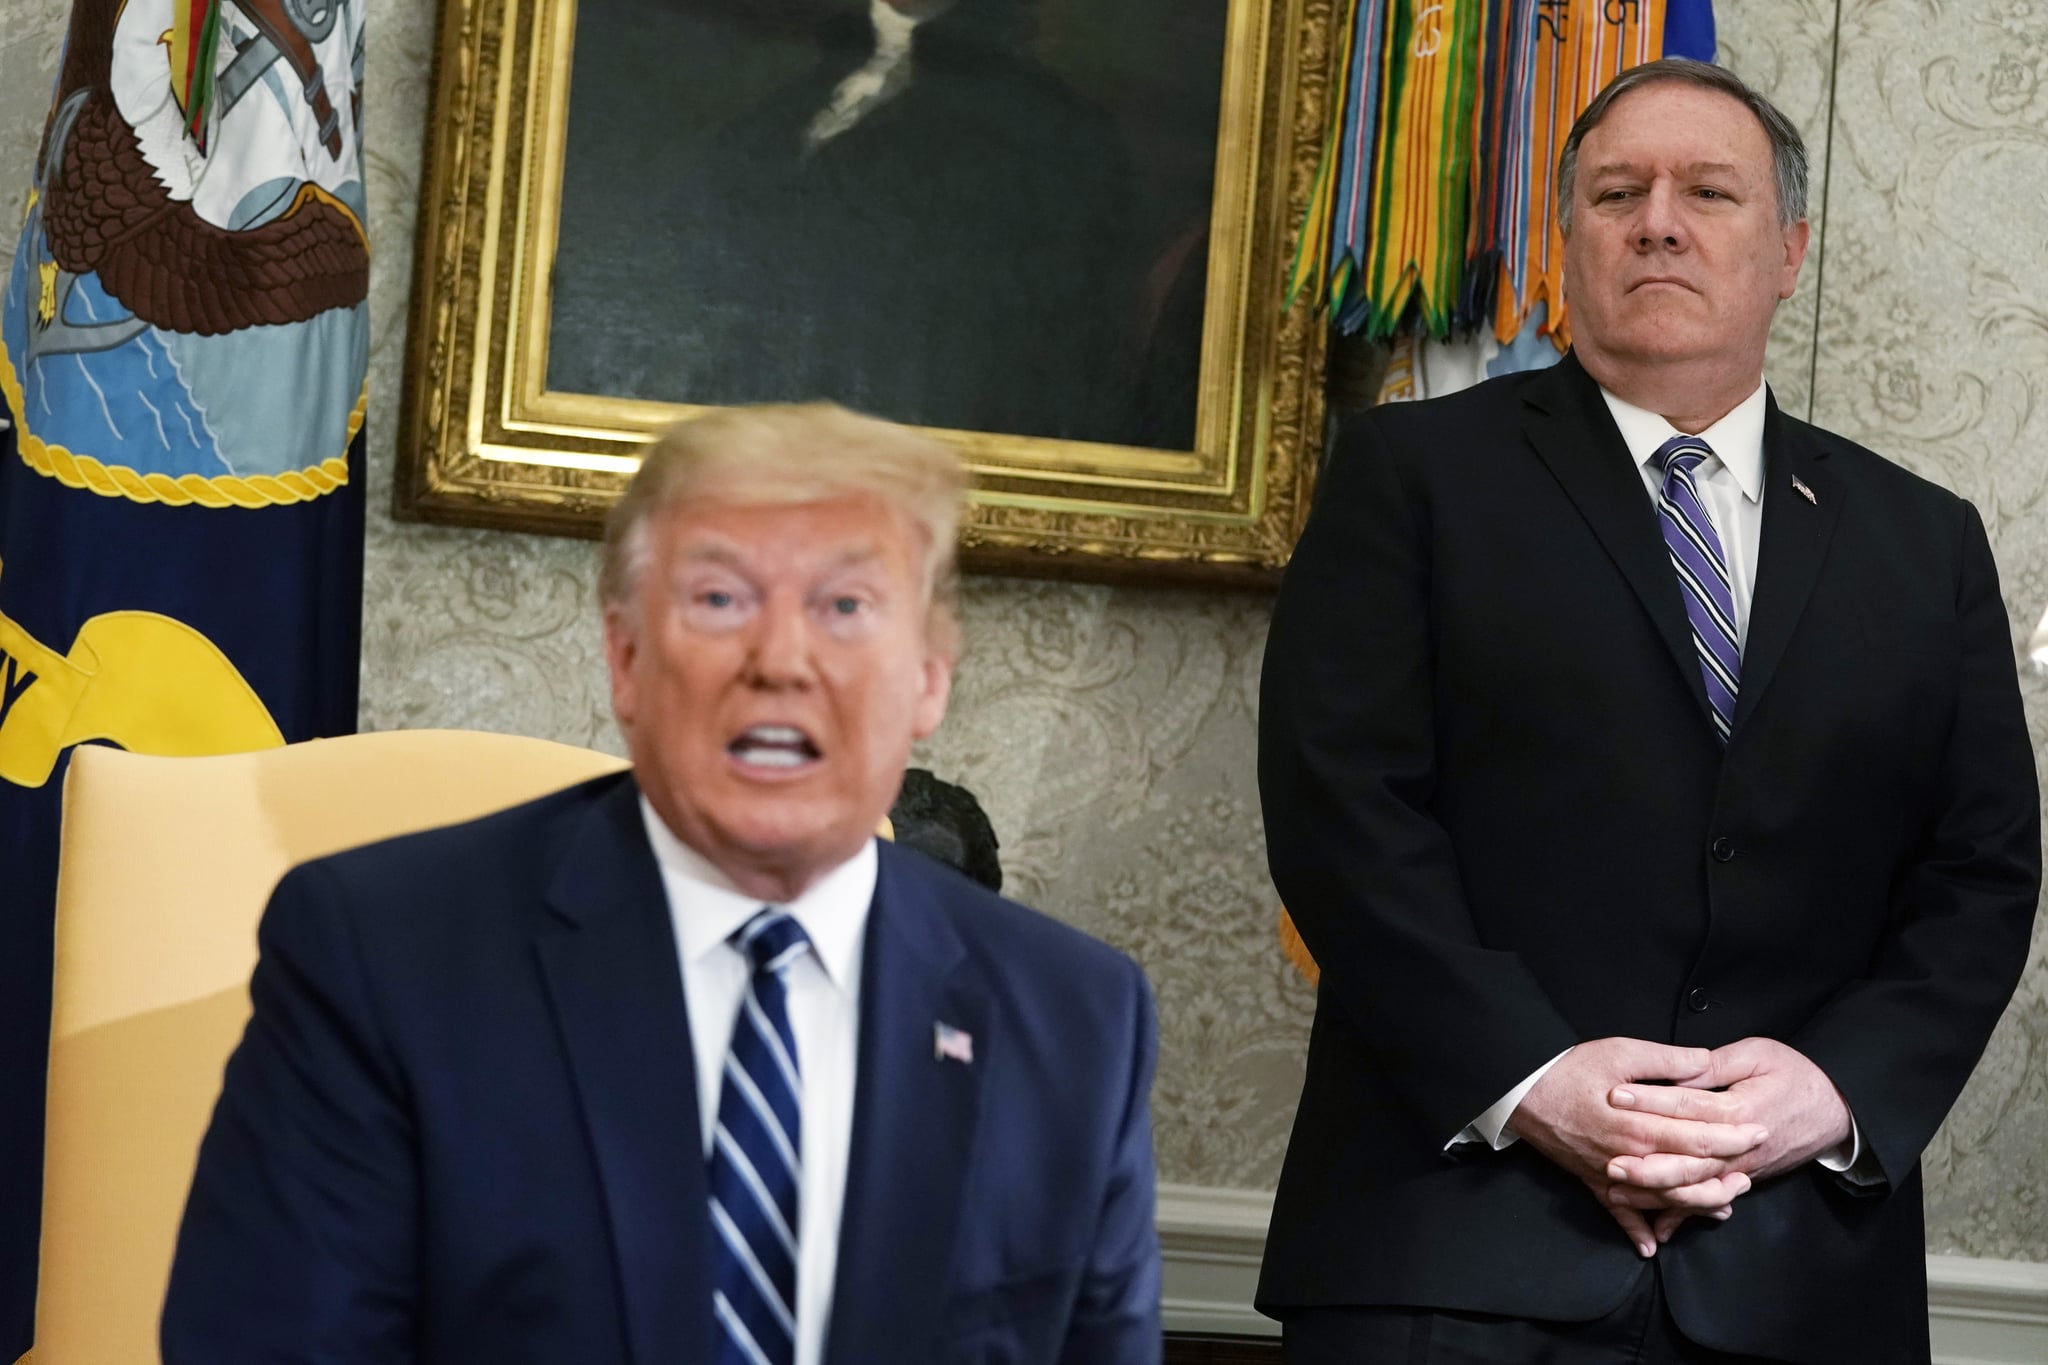 WASHINGTON, DC - JUNE 20:  U.S. Secretary of State Mike Pompeo looks on as President Donald Trump speaks during a meeting with Canadian Prime Minister Justin Trudeau in the Oval Office of the White House June 20, 2019 in Washington, DC. Trump and Trudeau were expected to discuss the trade agreement between the U.S., Canada and Mexico.  (Photo by Alex Wong/Getty Images)